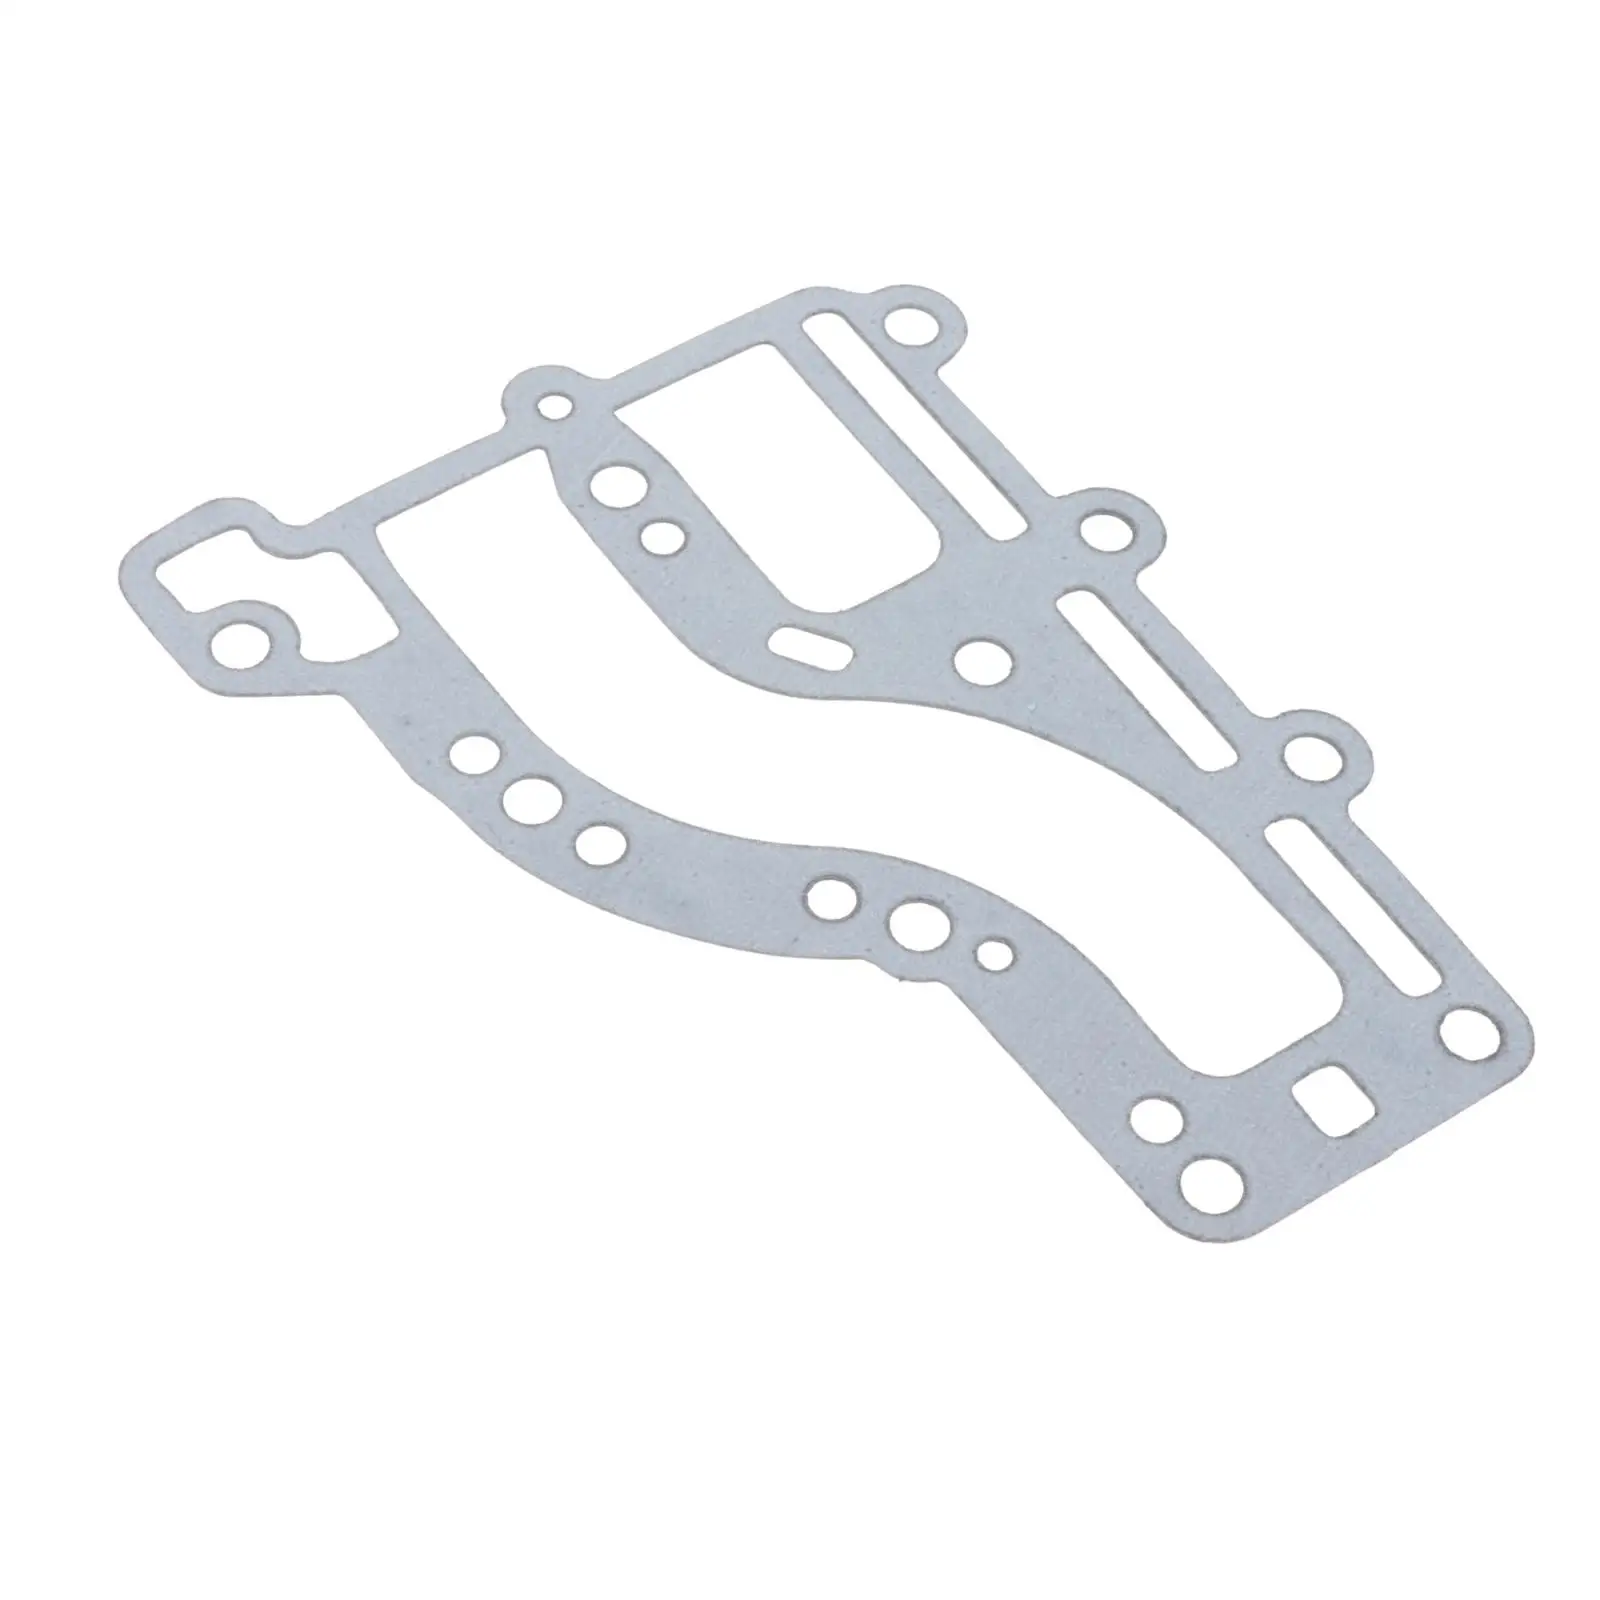 New Cylinder Inner Gasket for Yamaha Outboard Pars 2T 9.9 15 HP 682 6E7 series 682-41112-A1 682-41112-A0